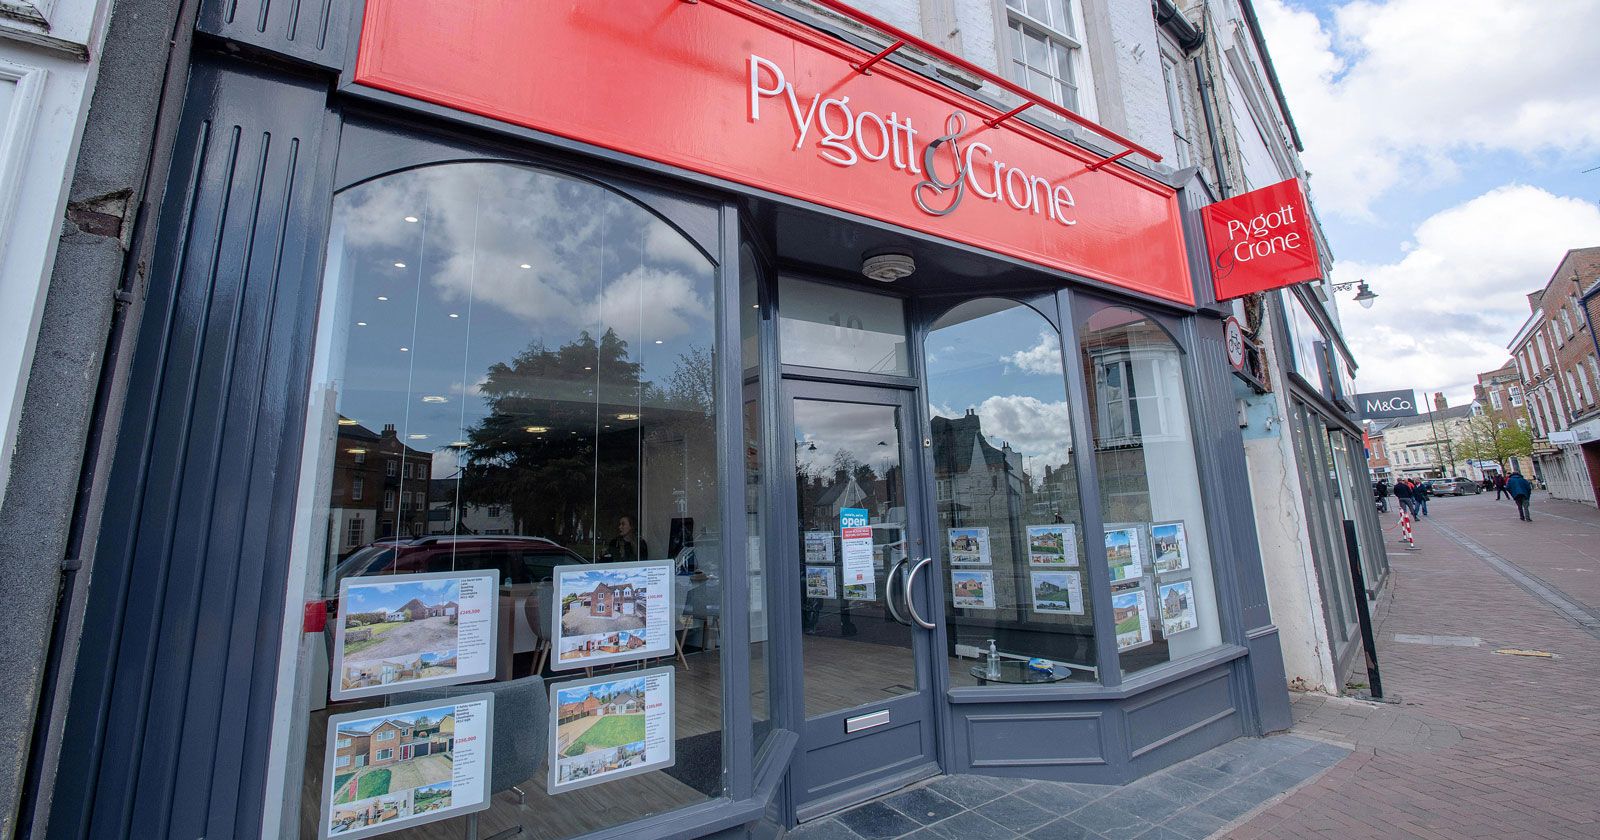 Pygott-and-Crone-Shop-Front-by-APSS